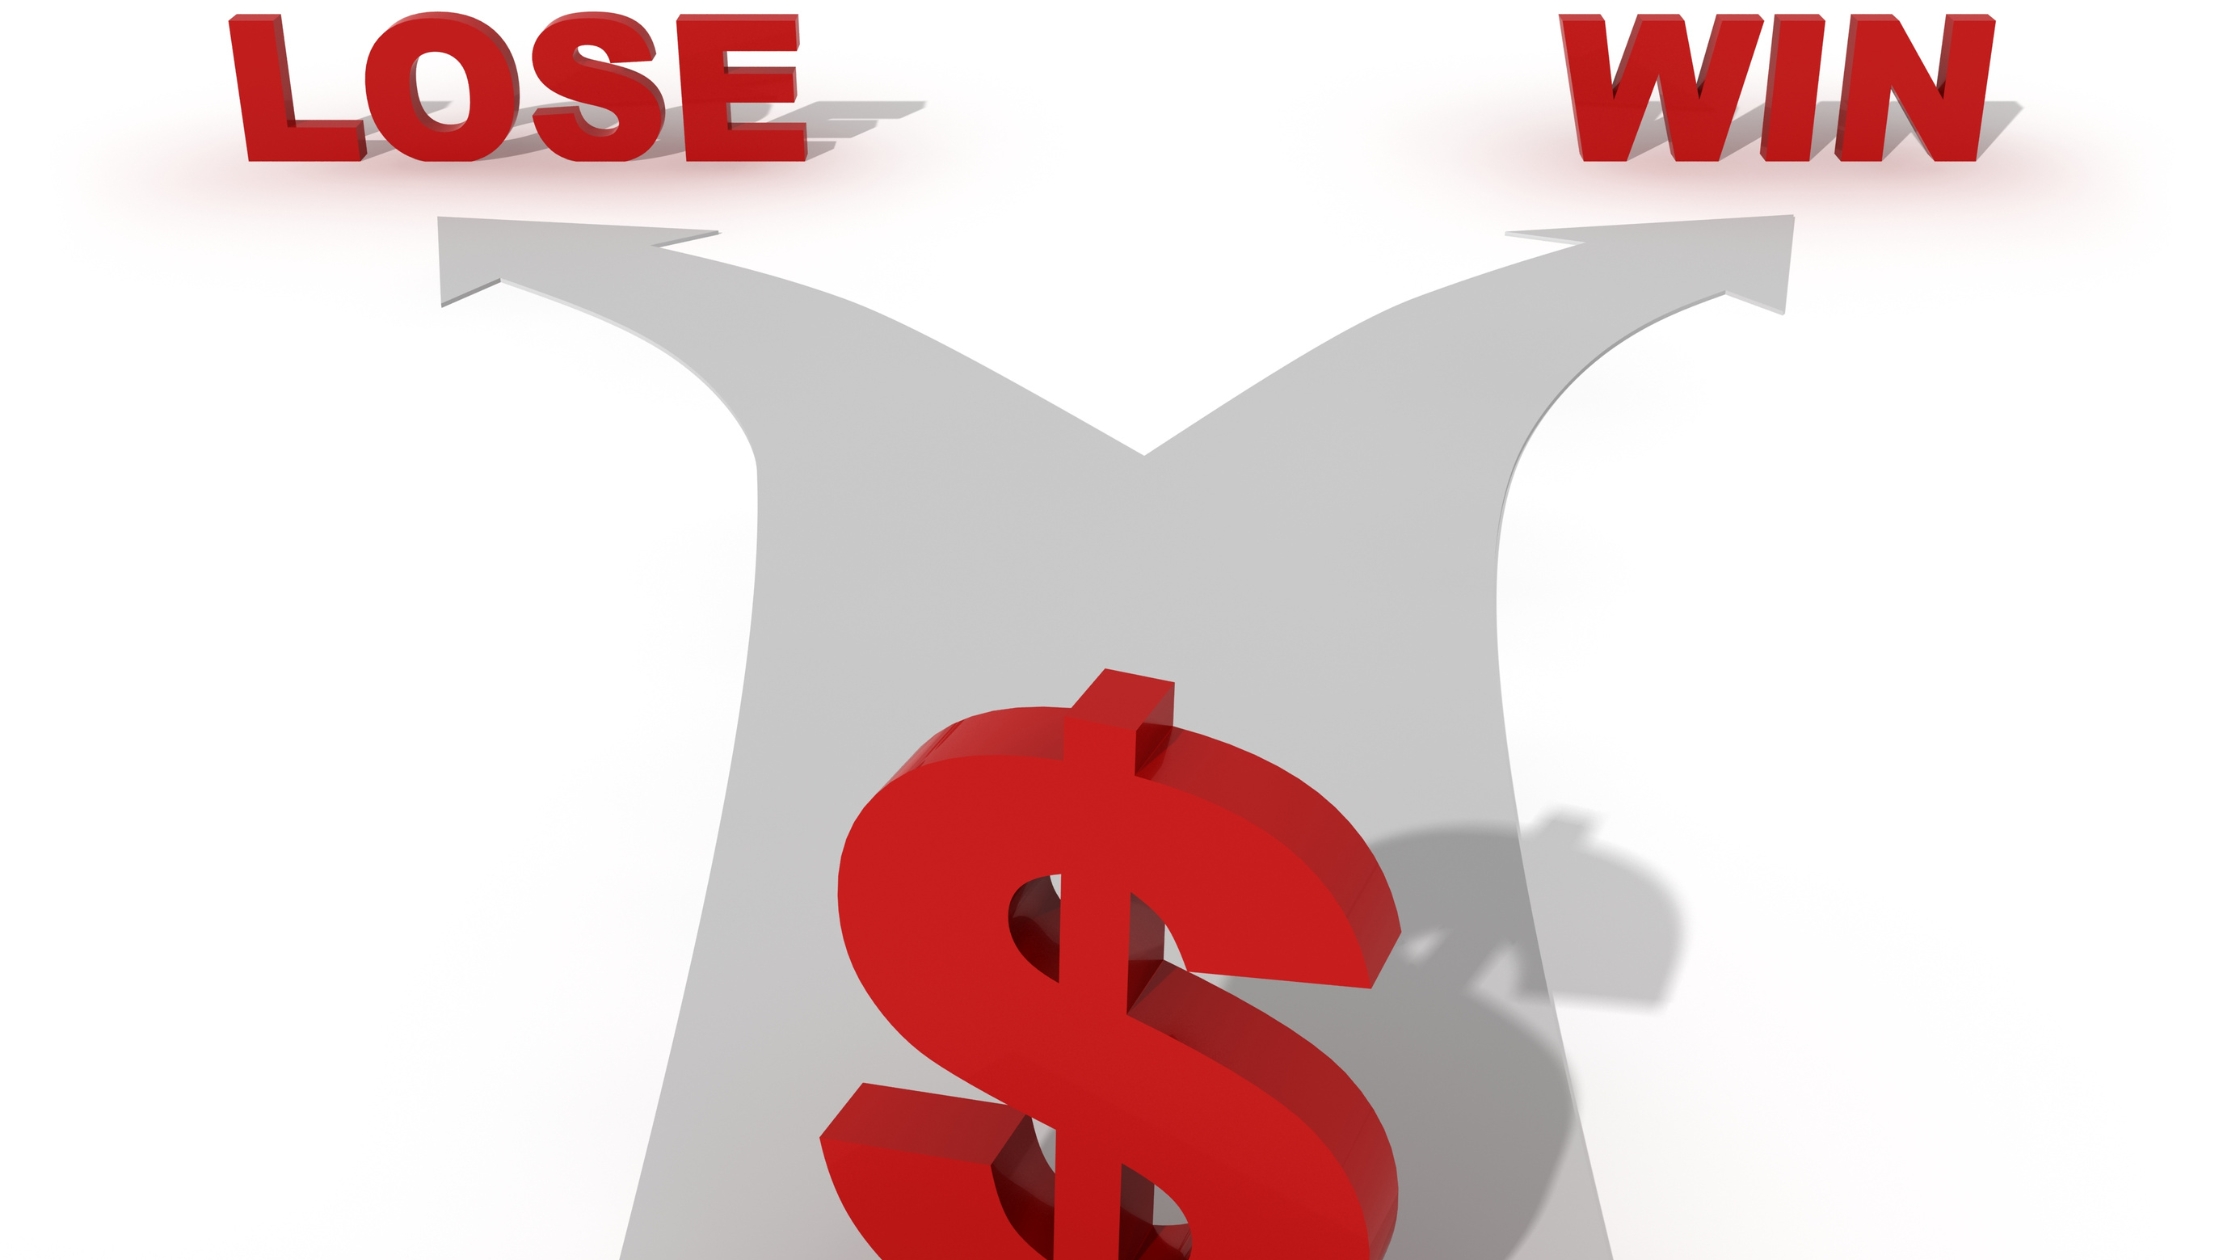 Managing Business Stress: Red dollar sign standing at a decision point on a gray split arrow. The text "Win" is written on one side of the arrow and "Lose" is written on the other side. This image metaphorically represents the financial uncertainty a business owner may experience.